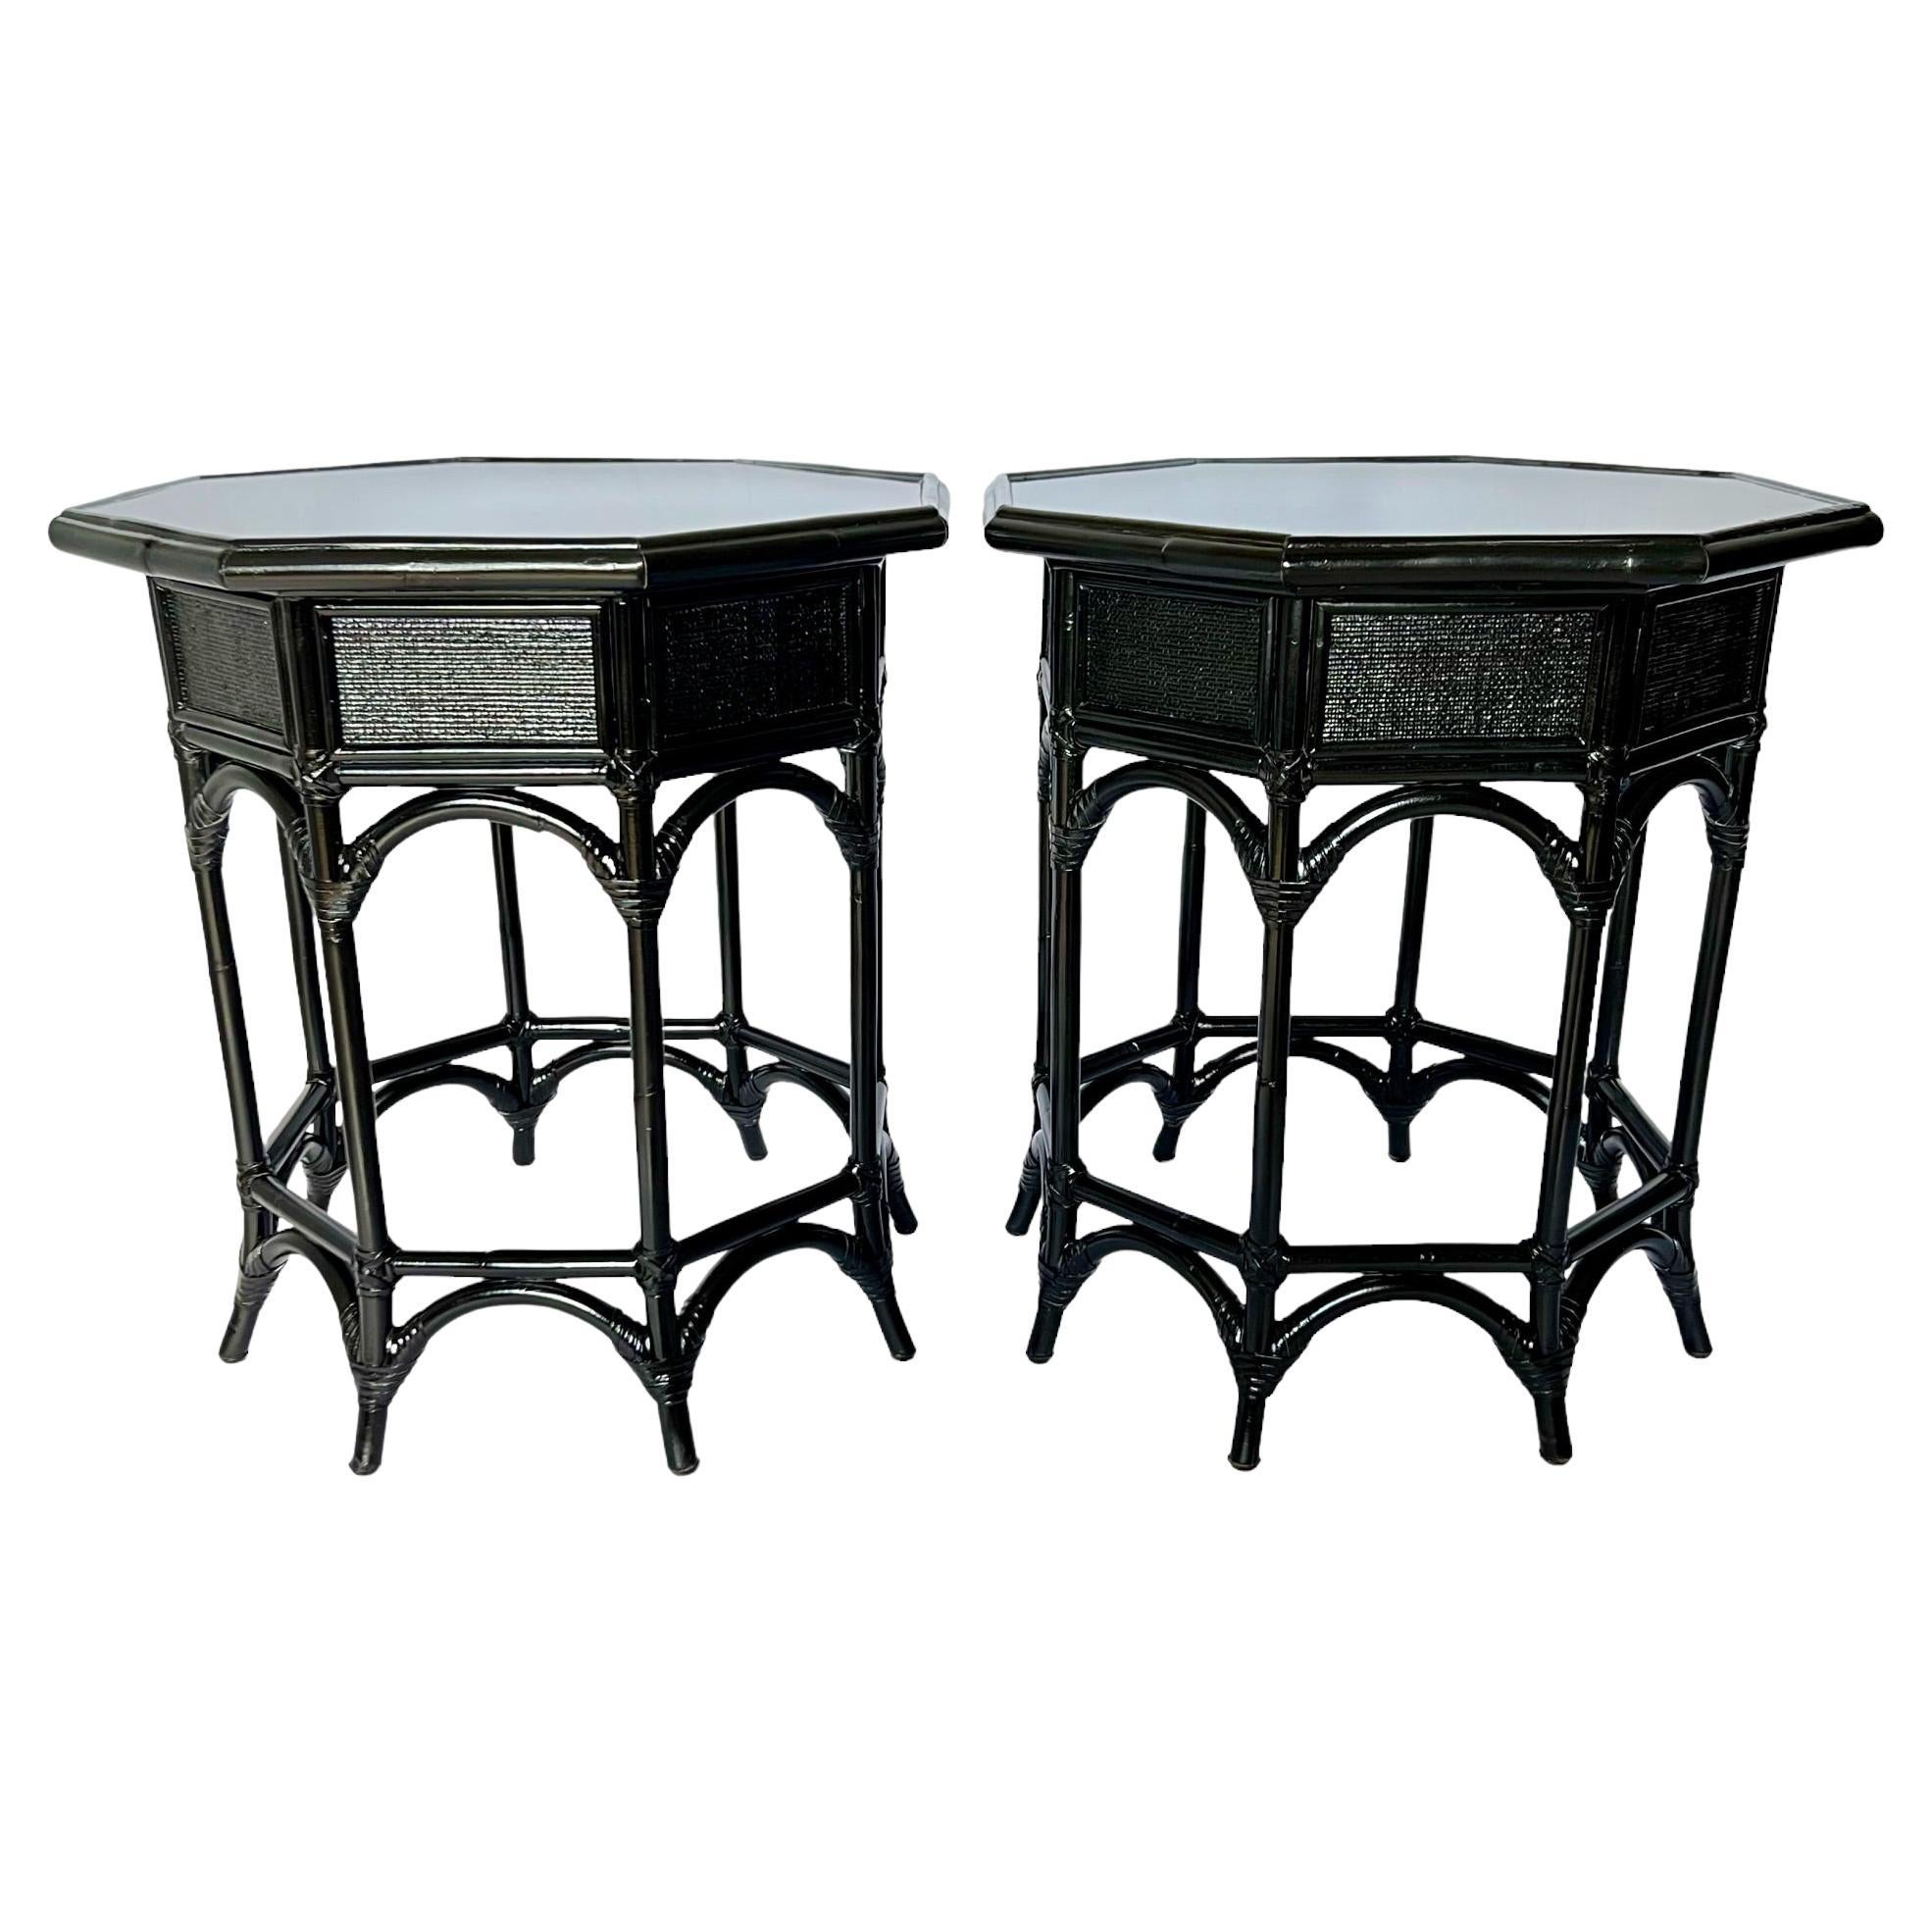 Vintage Refinished Black Rattan Resin Top Octagon Side Tables, a Pair For Sale